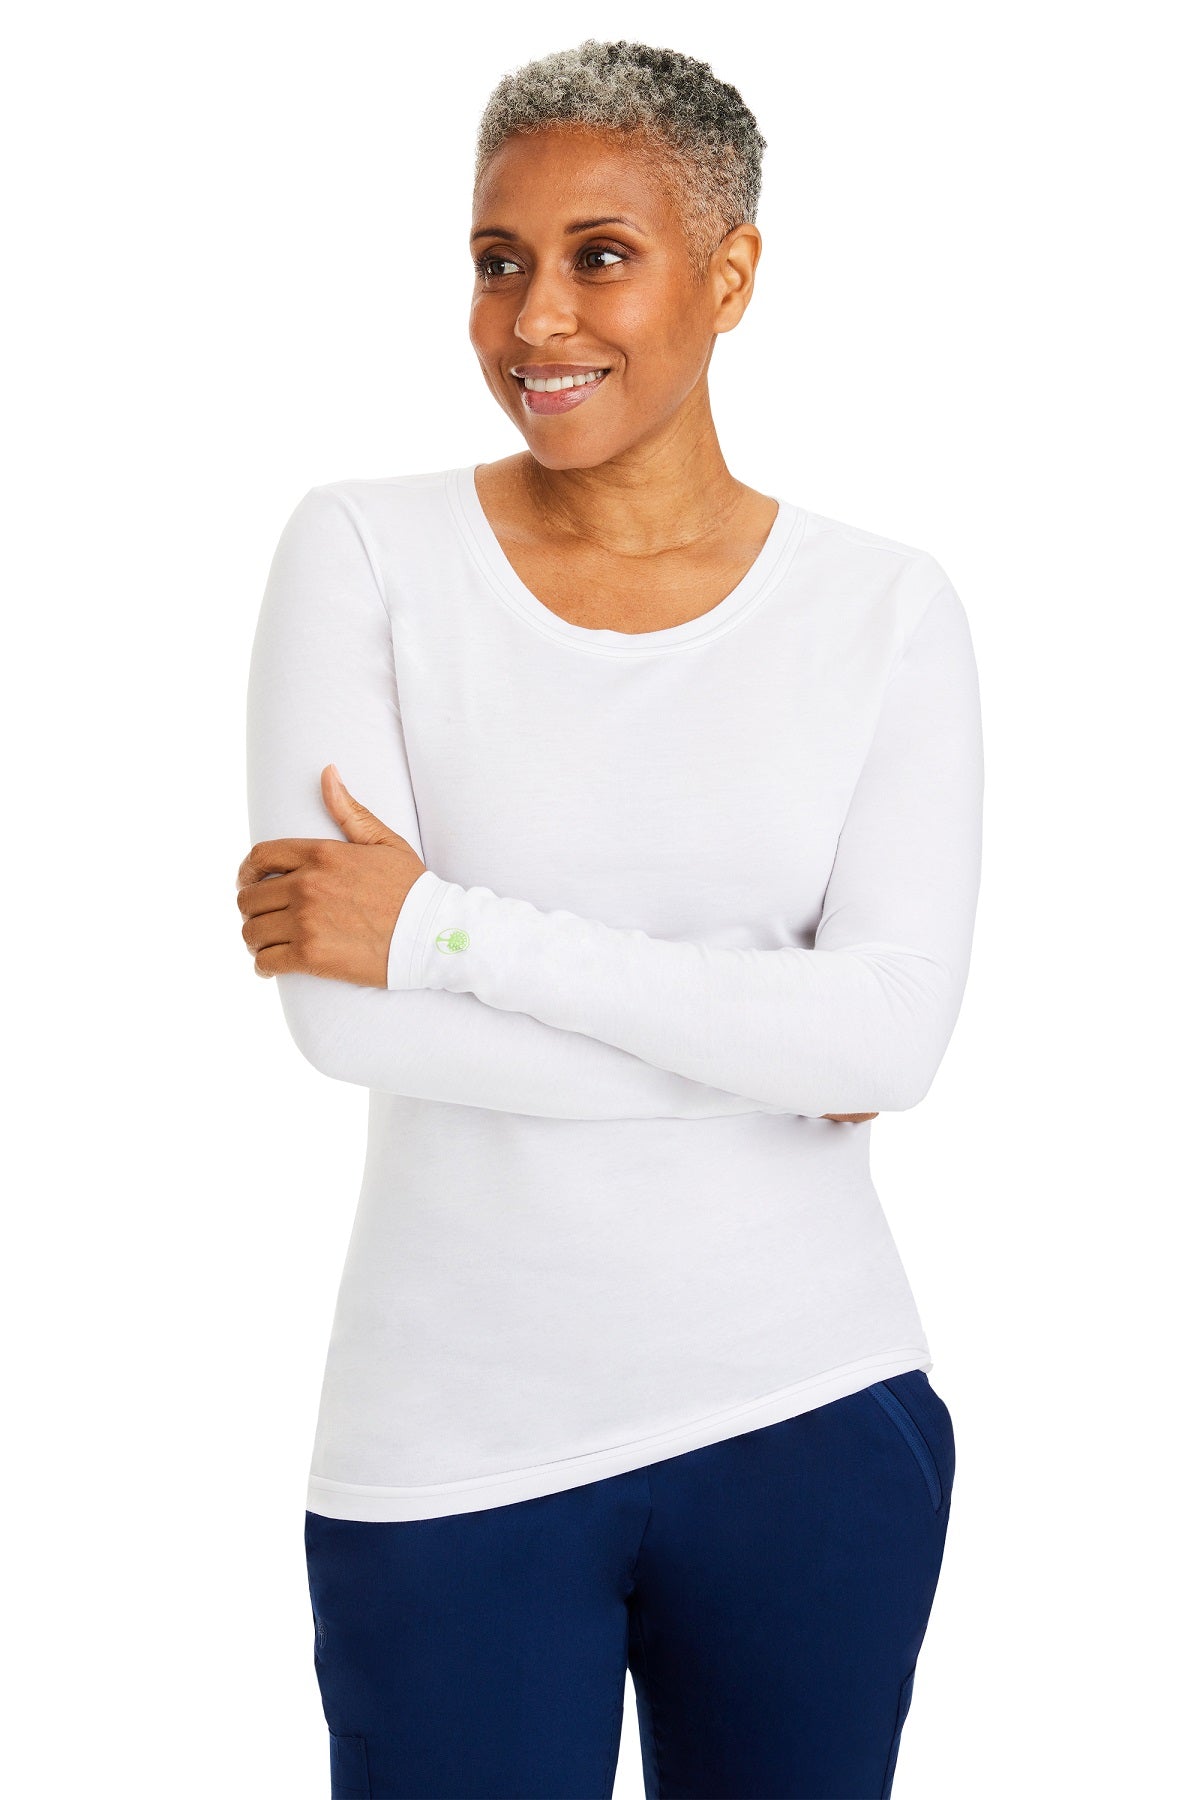 Healing Hands Purple Label Melissa Long Sleeve Tee in White at Parker's Clothing and Shoes.